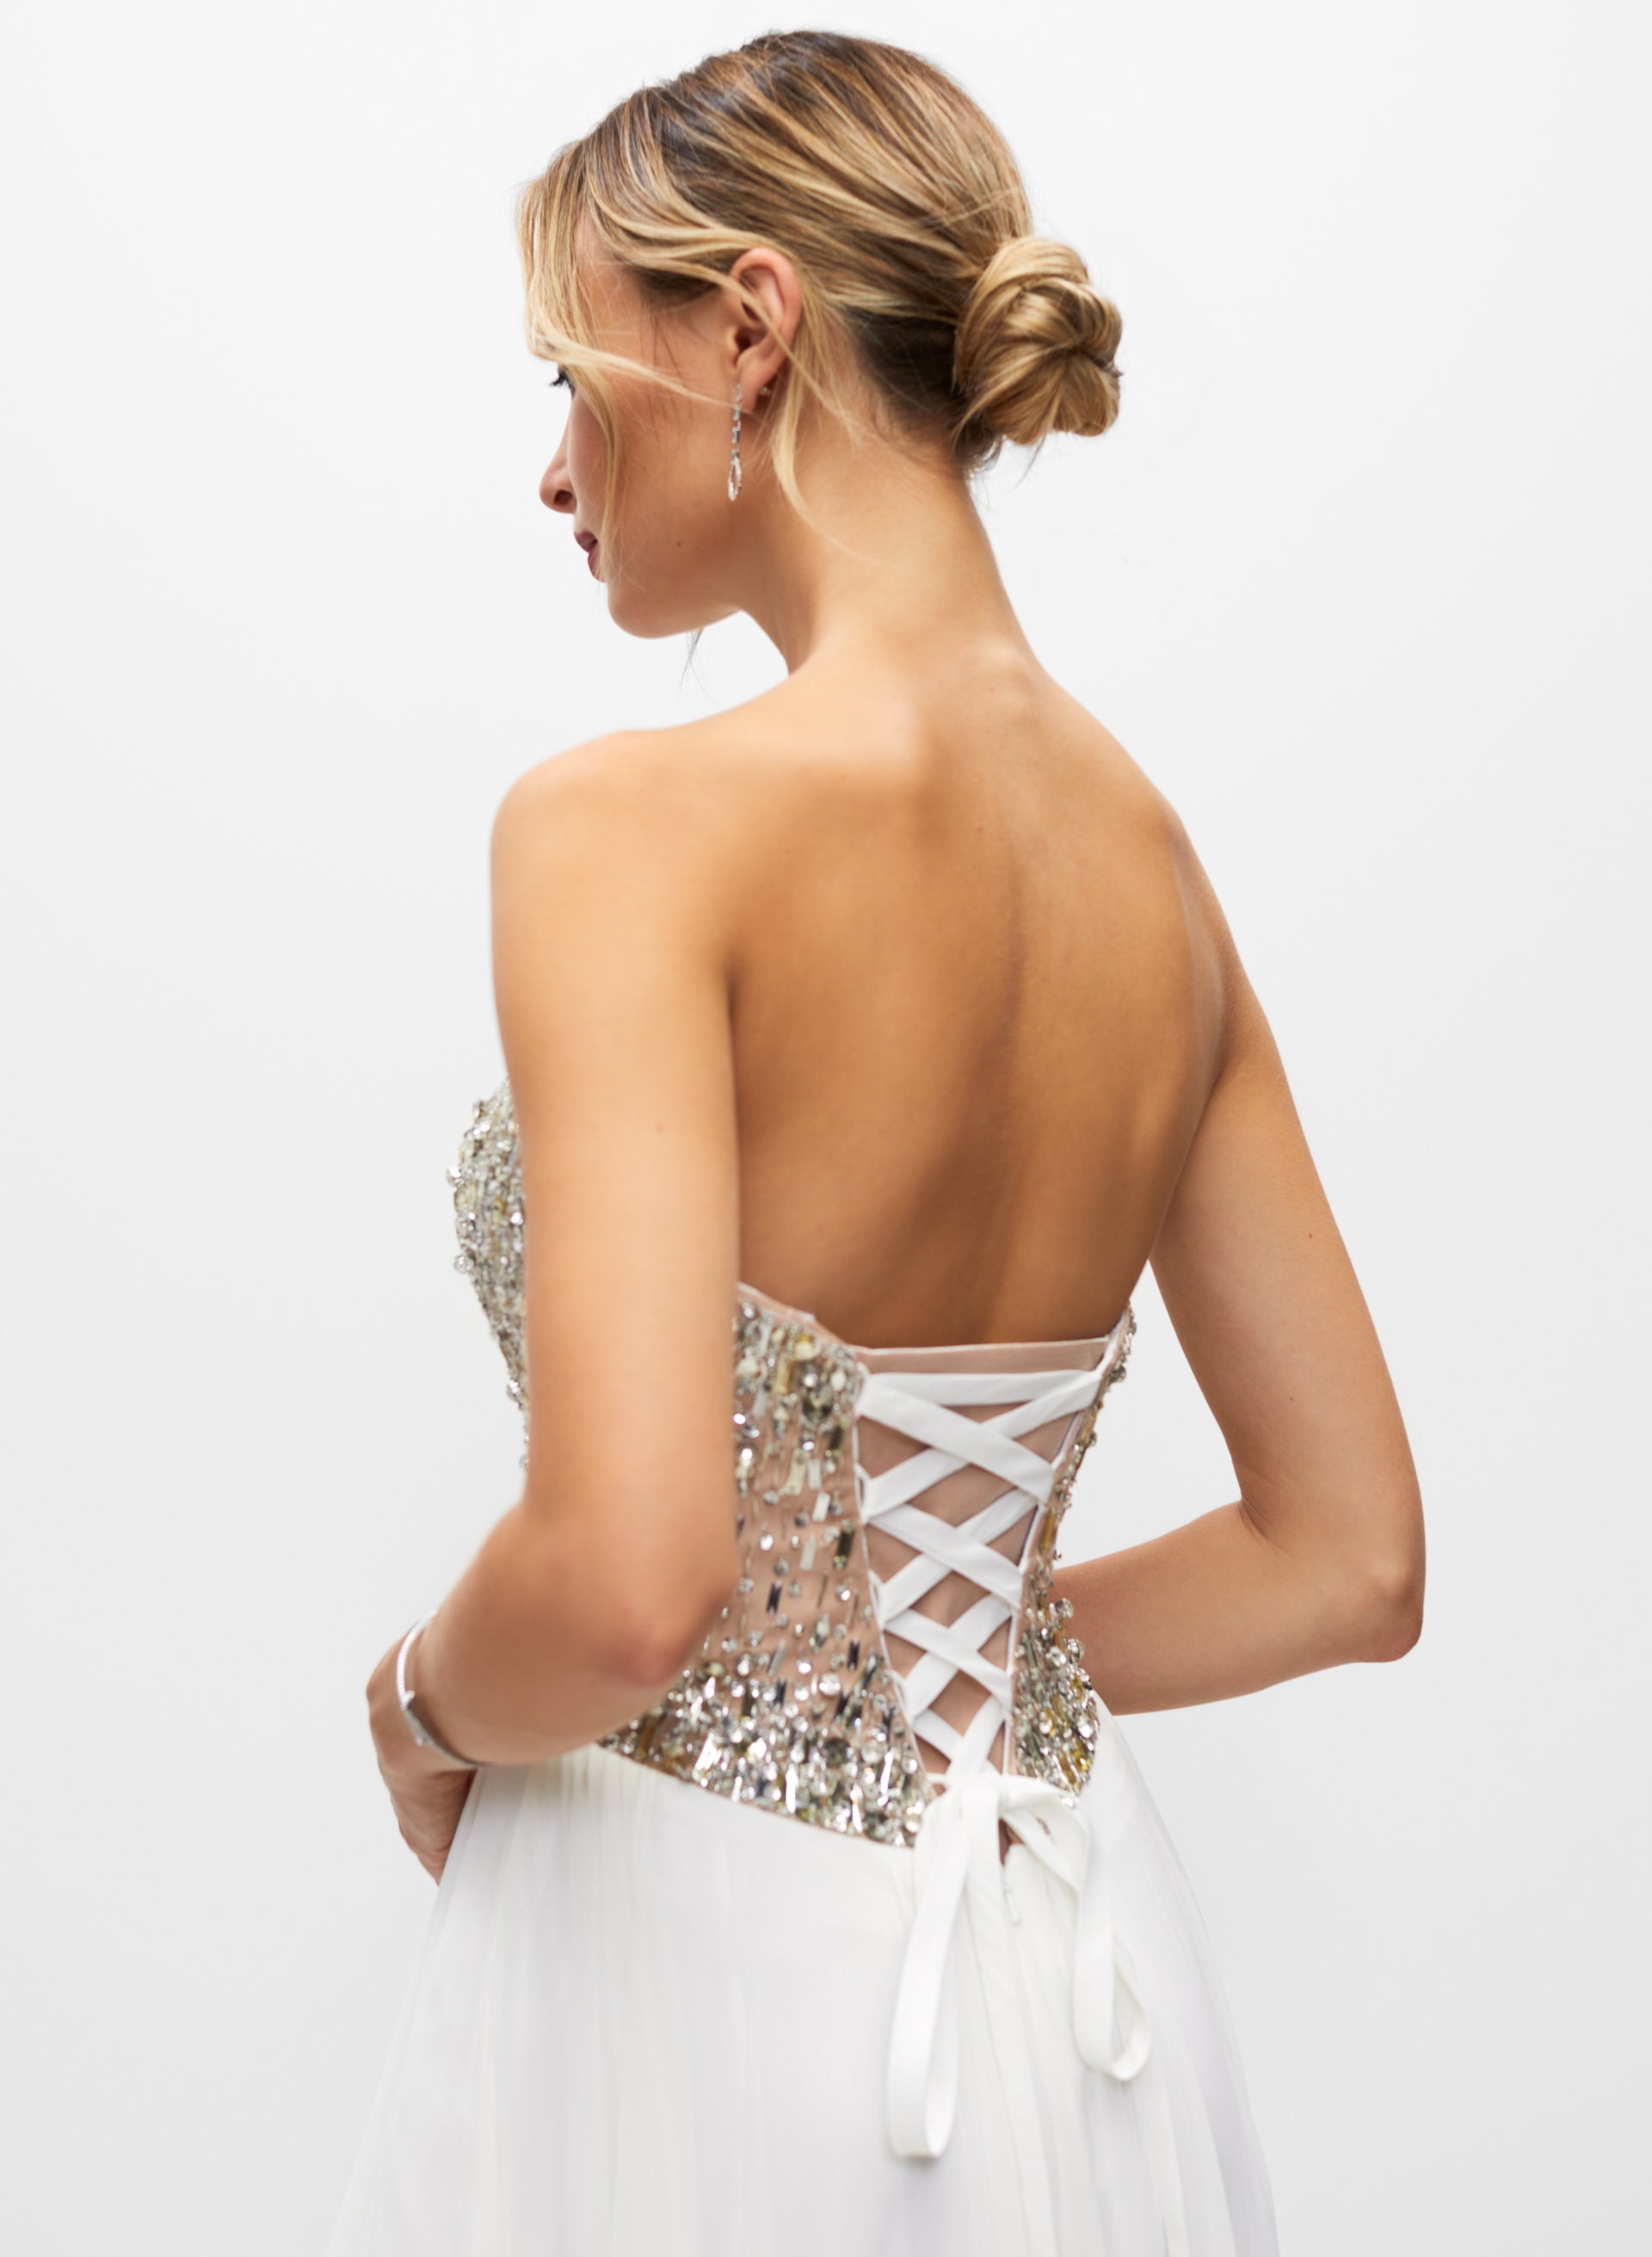 Beaded Bustier Gown